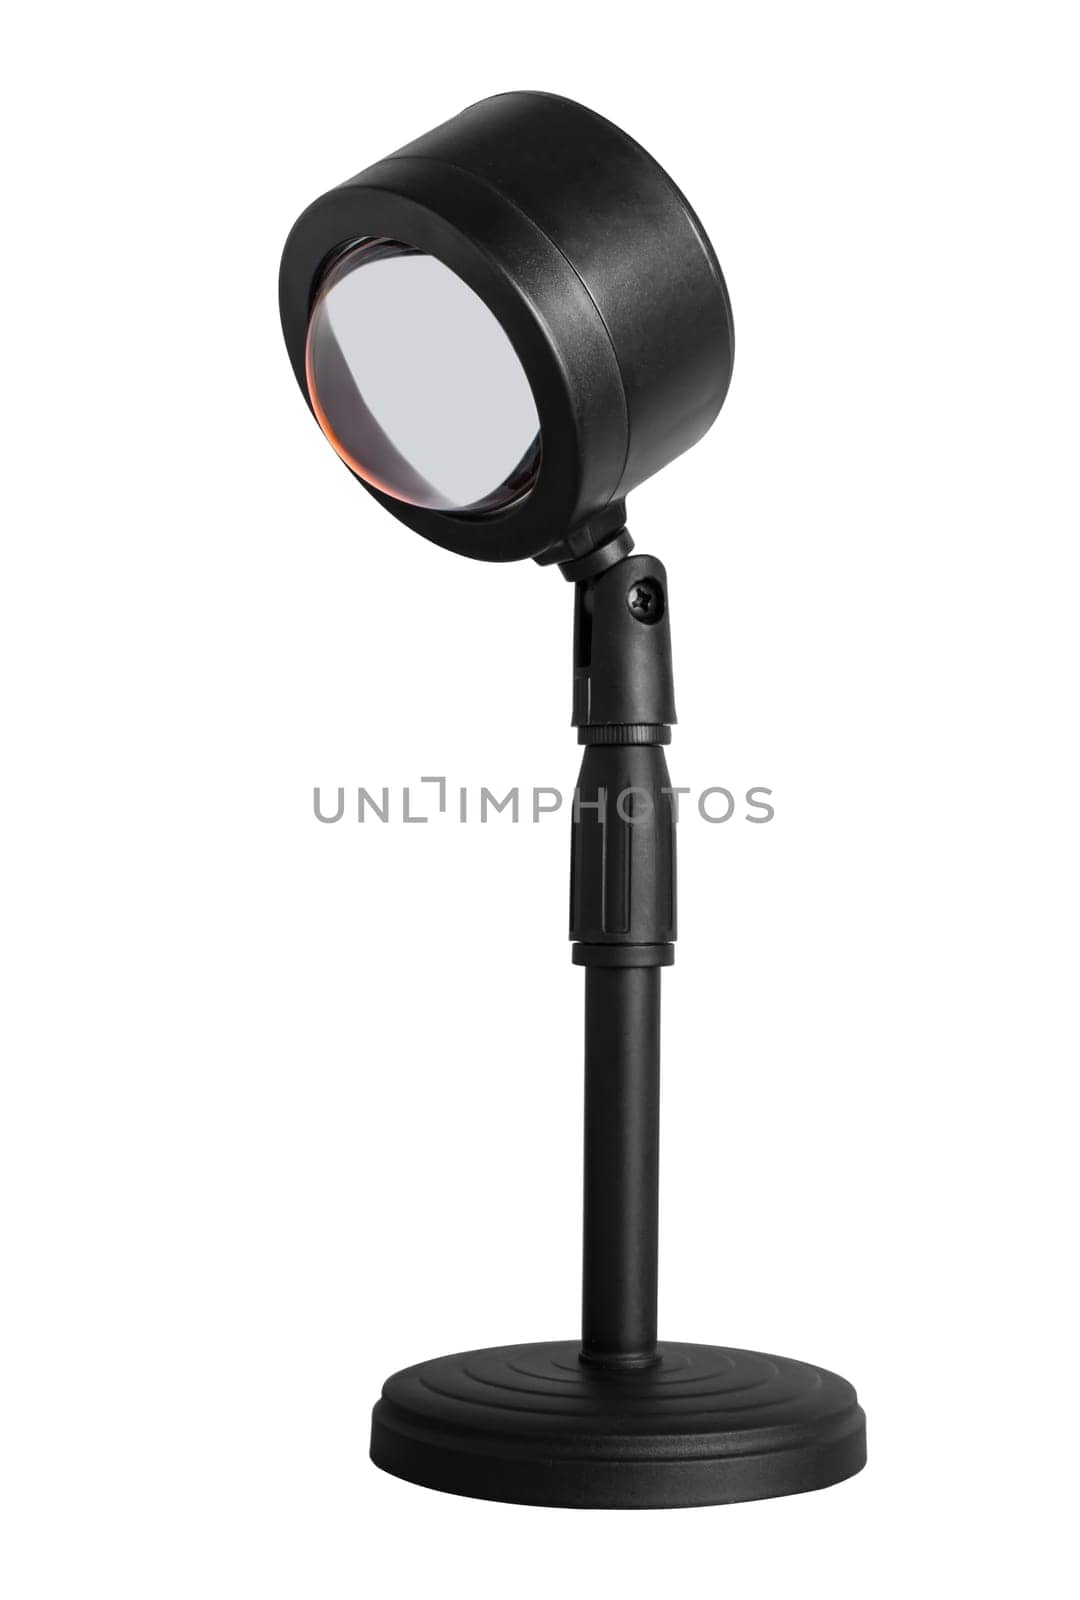 Lamp illuminator on a tripod, on a white background in insulation by A_A